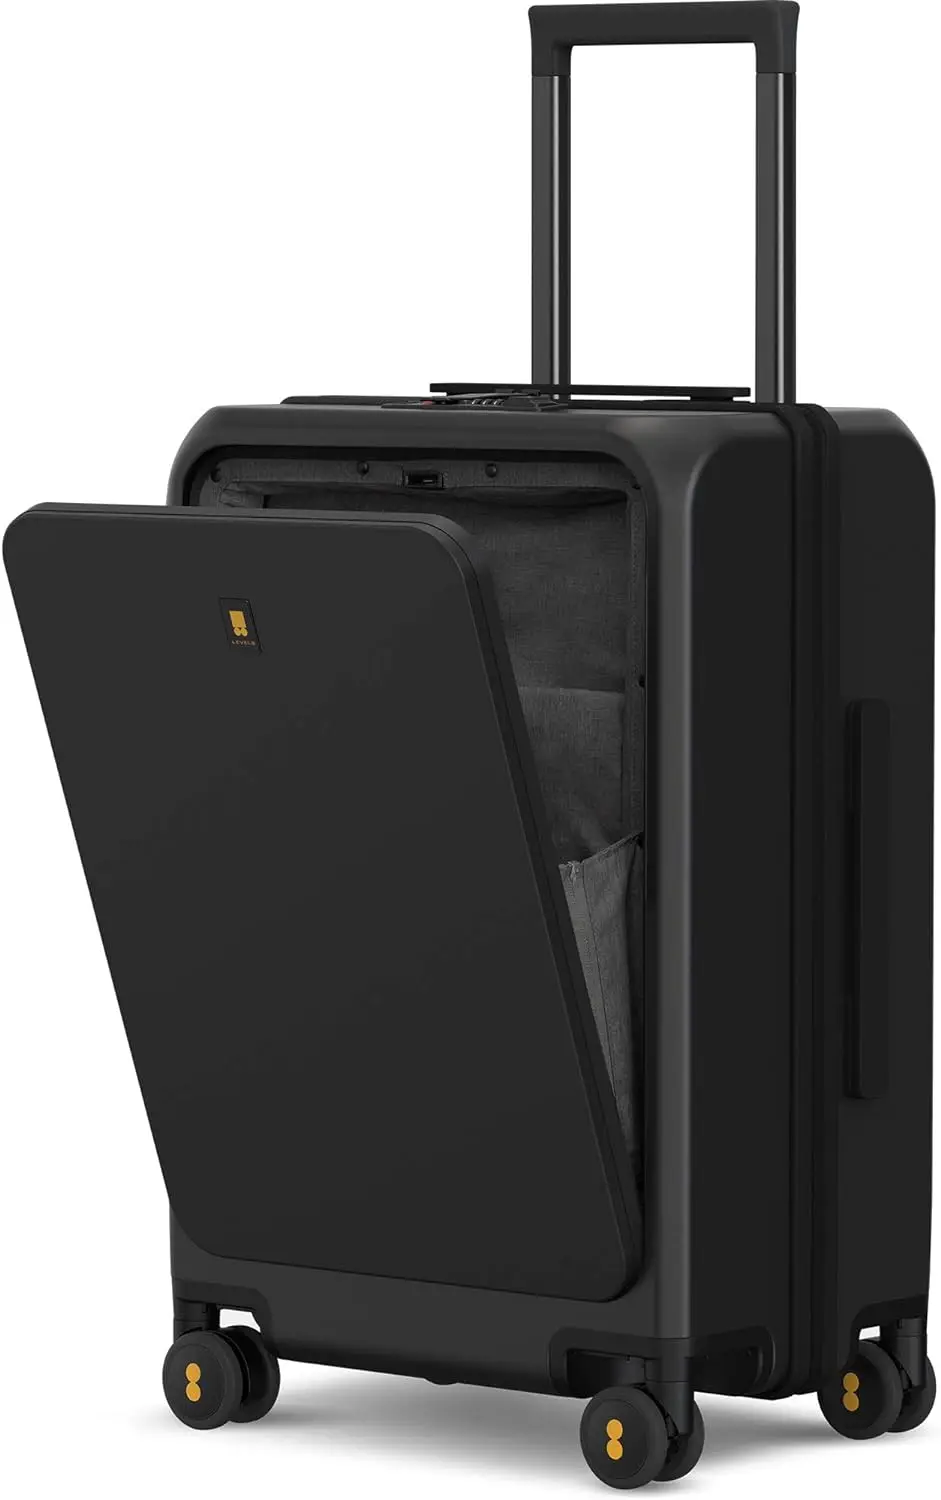 

LEVEL8 Road Runner Pro Carry-On Luggage, 20” Lightweight PC Hardside Suitcase with USB Charging Port, Spinner Trolley